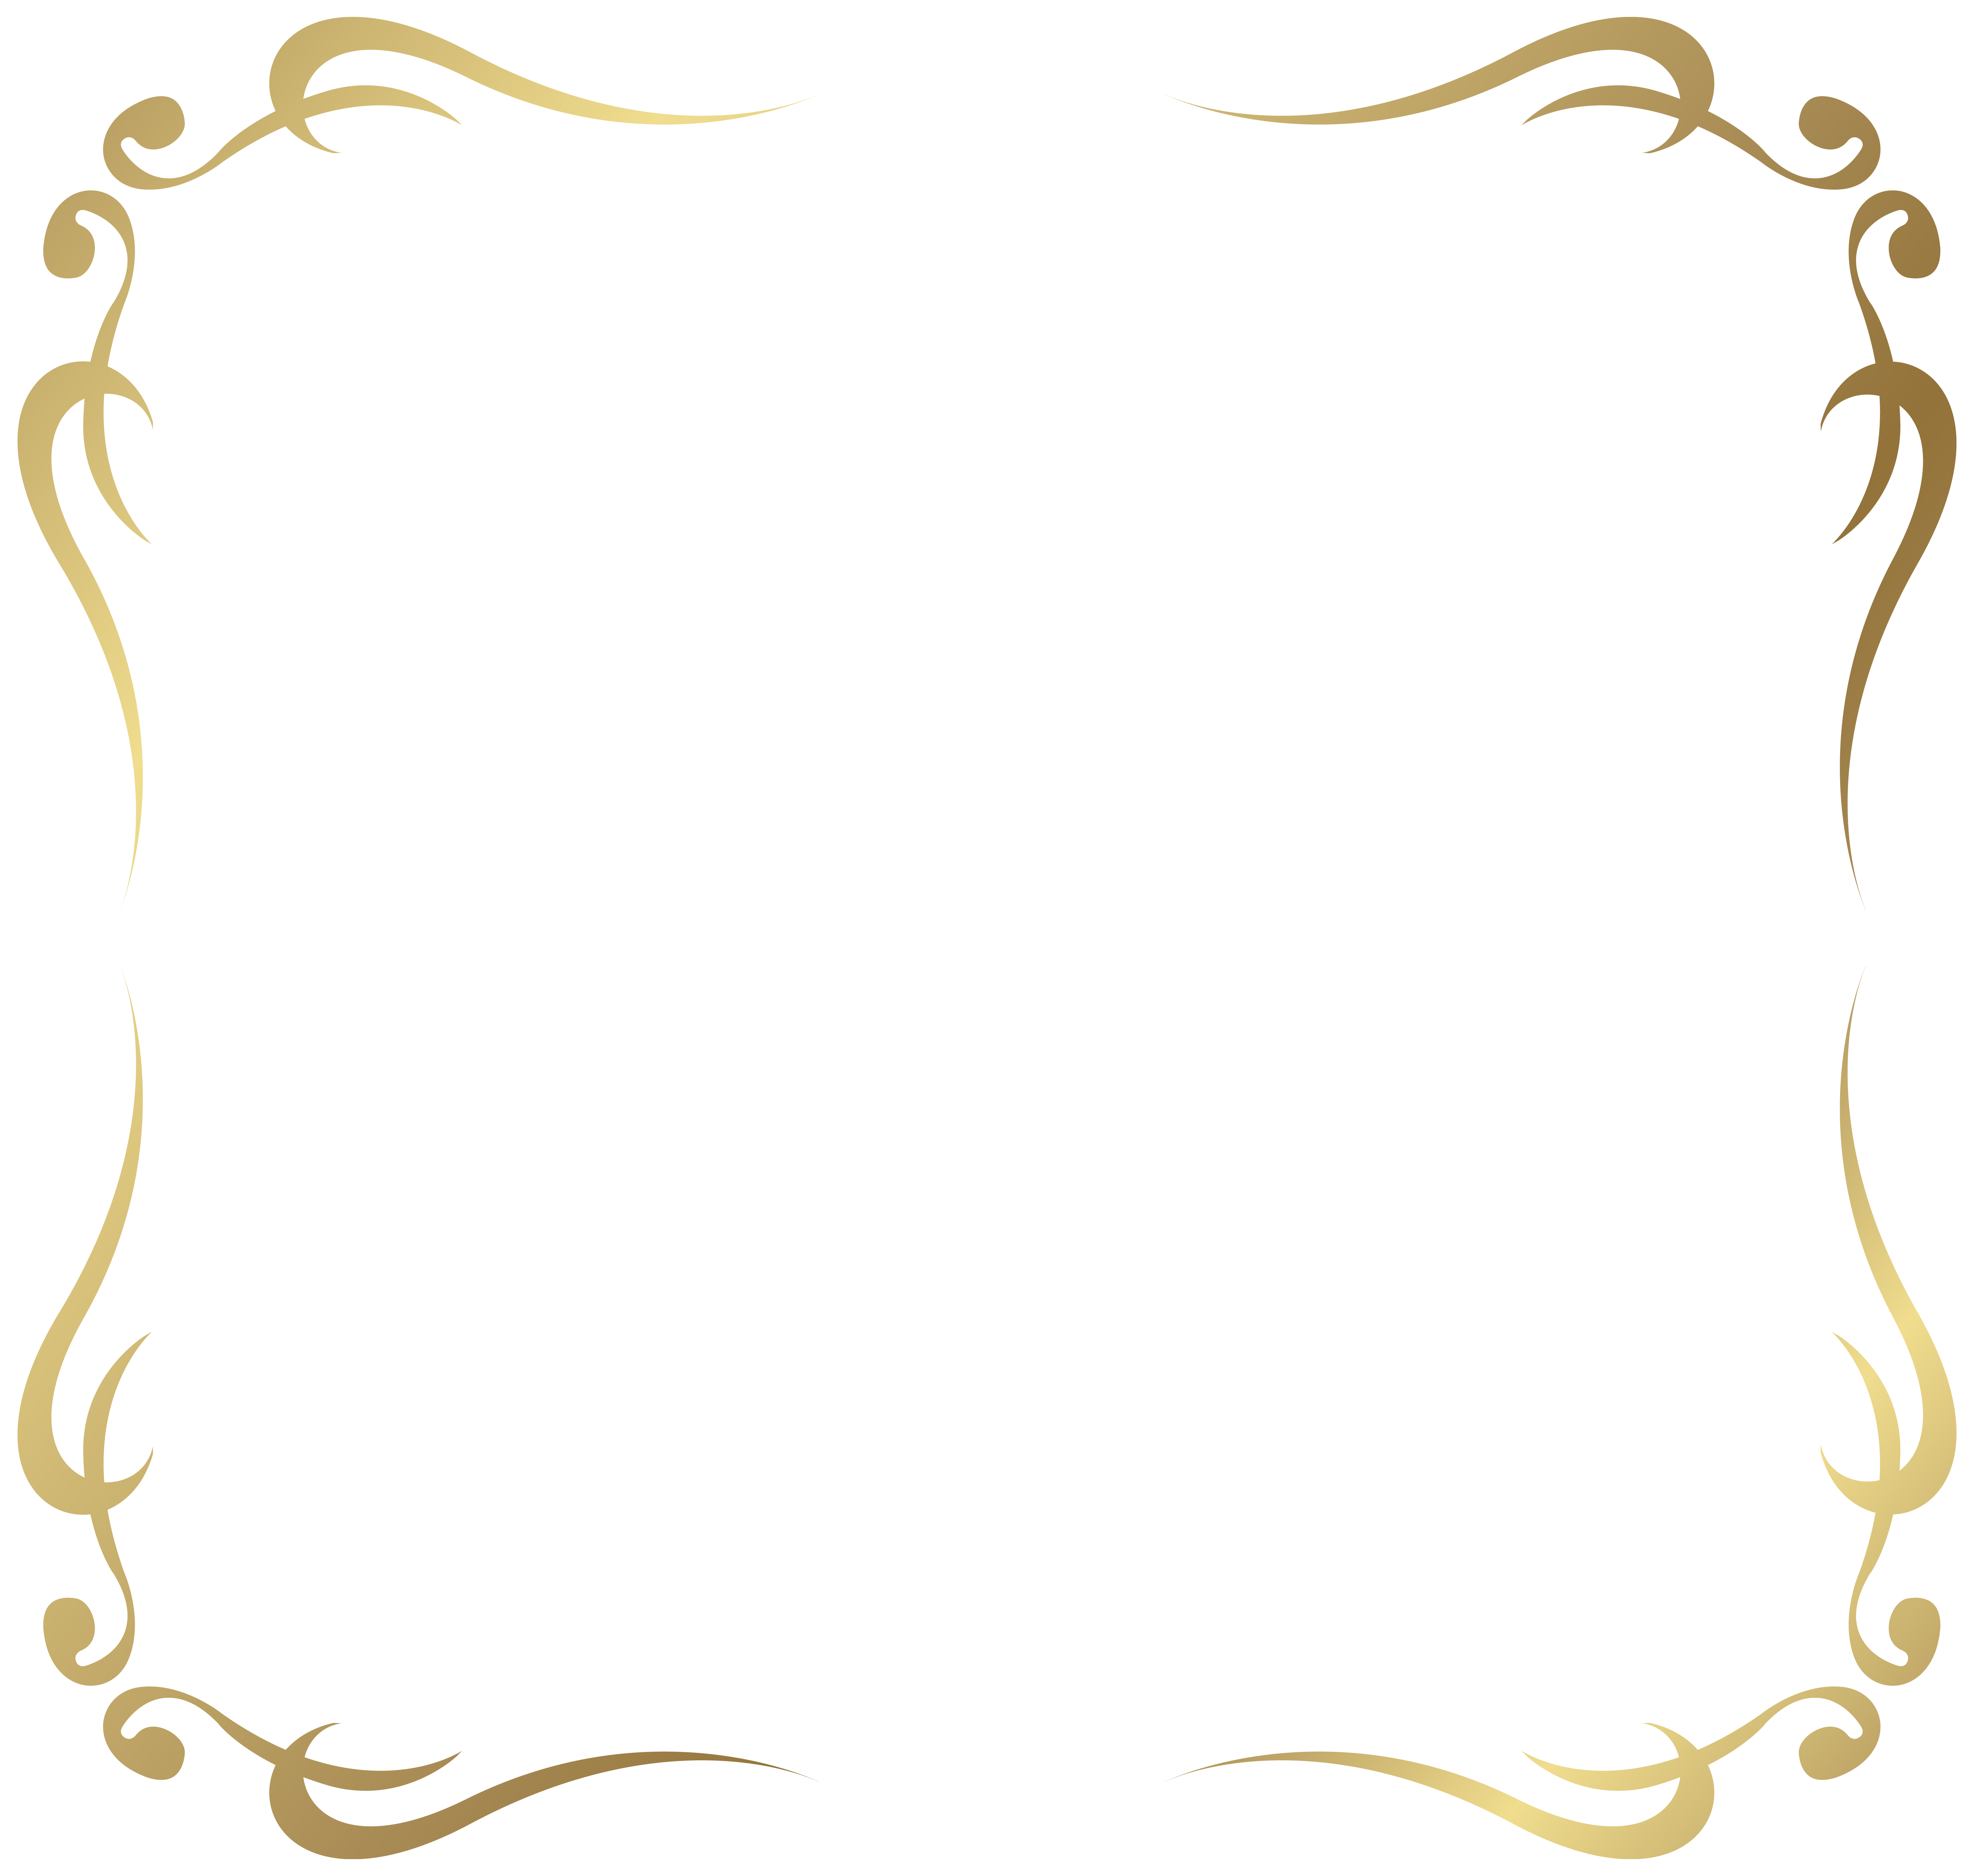 png clipart frame - photo #2